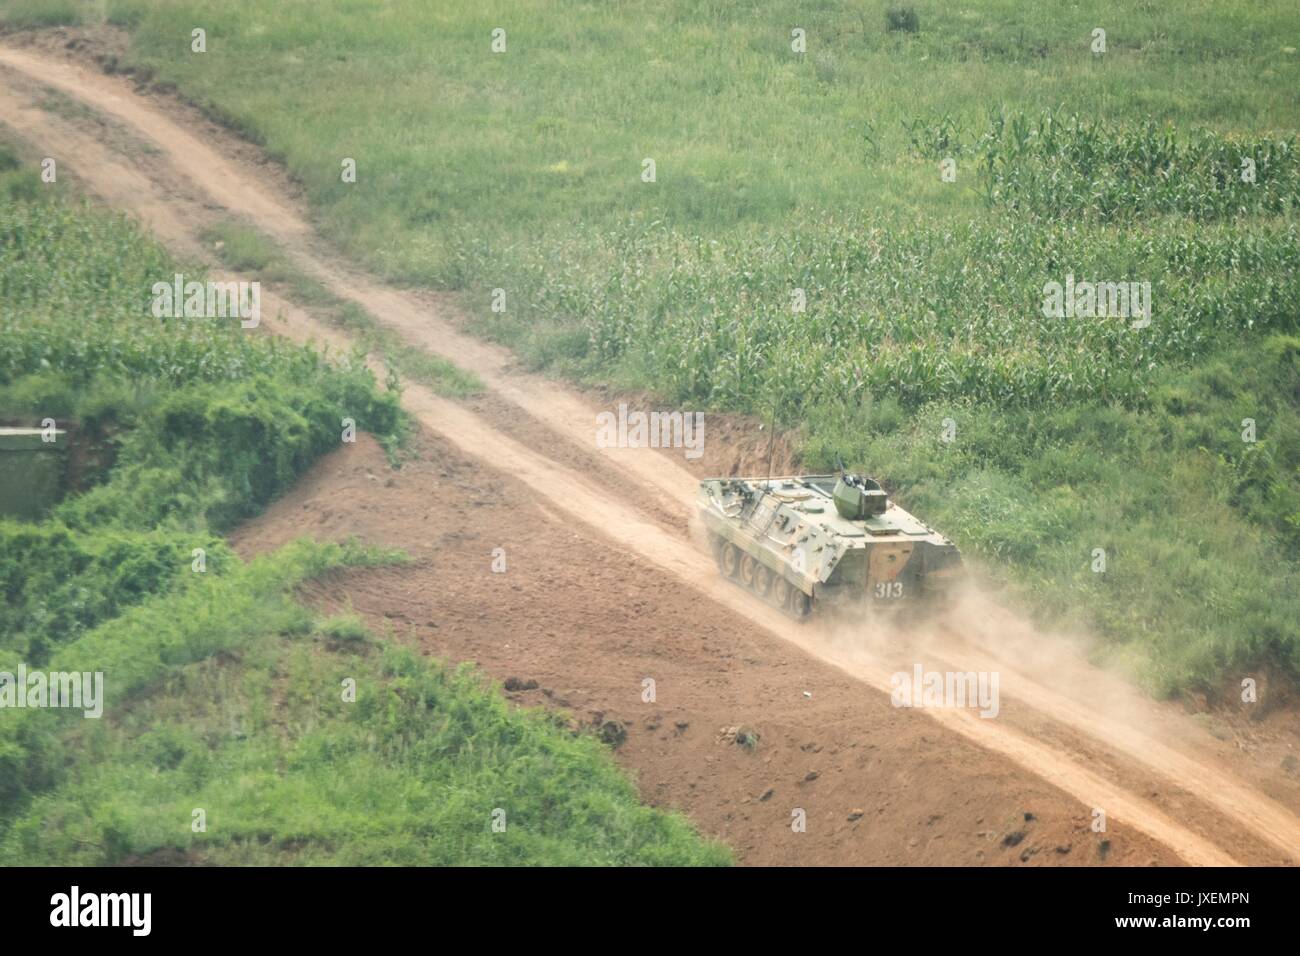 Haichung, China. 16th Aug, 2017. People's Liberation Army soldiers maneuver in an armored personal carrier during an attack exercise at the Chinese Northern Theater Command Army Force Haichung Camp August 16, 2017 in Haichung, China. The exercise was for visiting U.S. Chairman of the Joint Chiefs Gen. Joseph Dunford. Credit: Planetpix/Alamy Live News Stock Photo